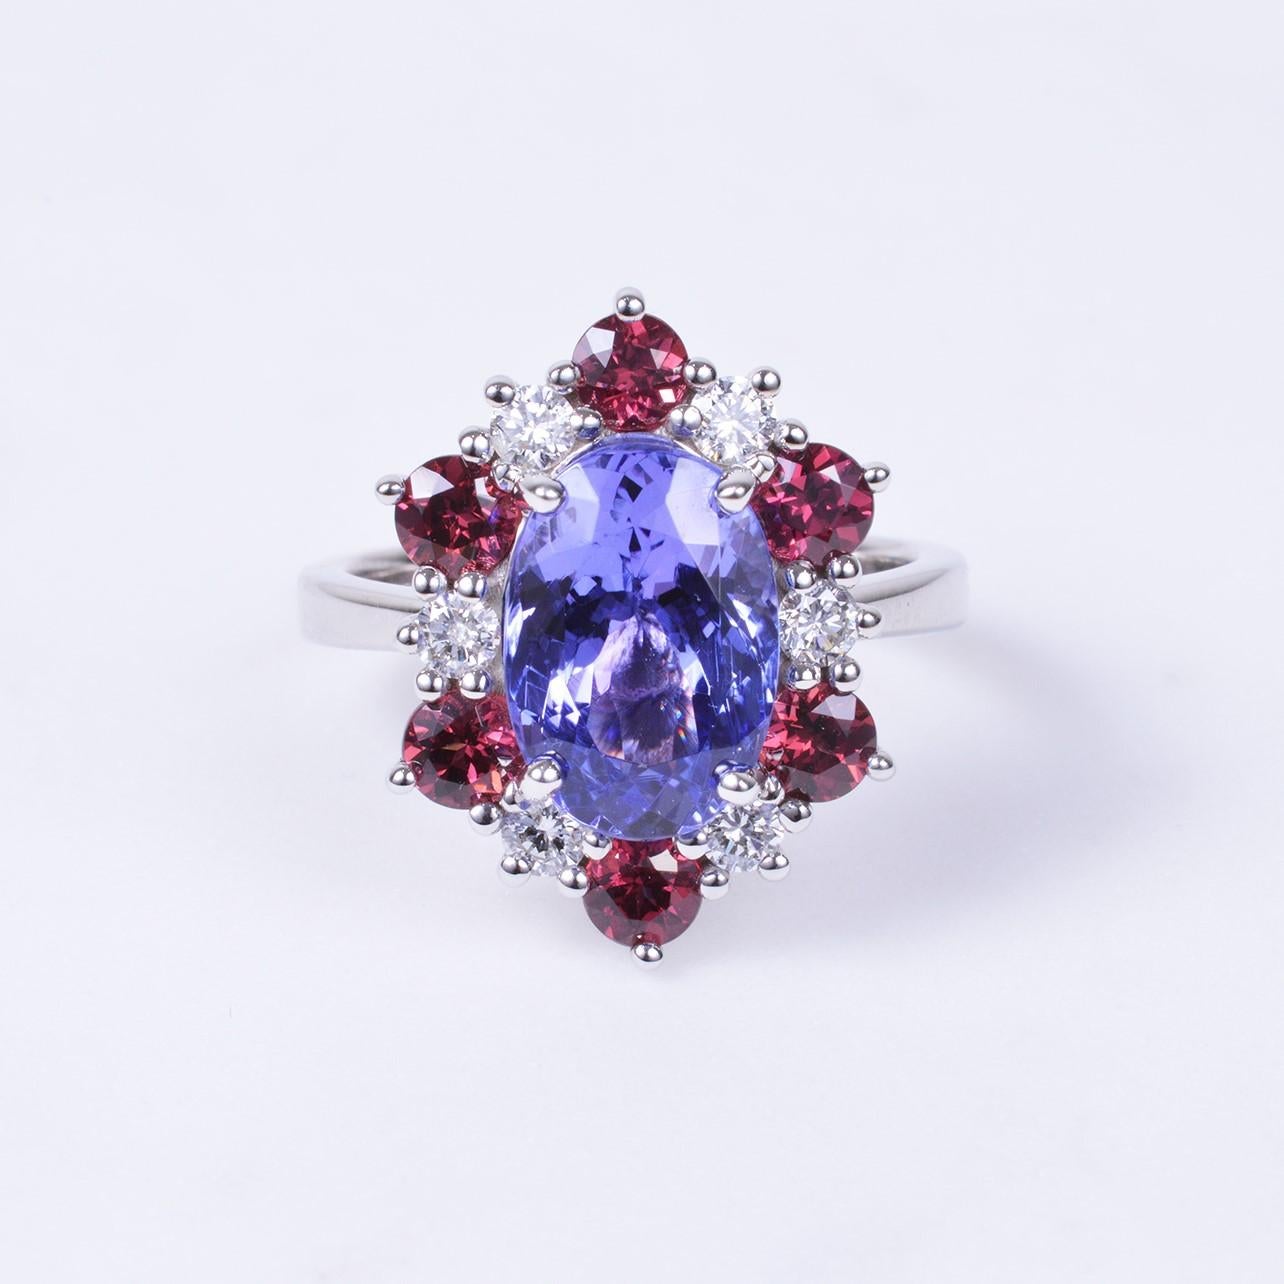 This ring truly is remarkable!! With a gorgeous 3.90 carat oval cut tanzanite in the center surrounded by 1.38 carats of rhodolite garnet and .32 carats of diamonds. All hand set in 14k white gold. Ring size is 6.25.